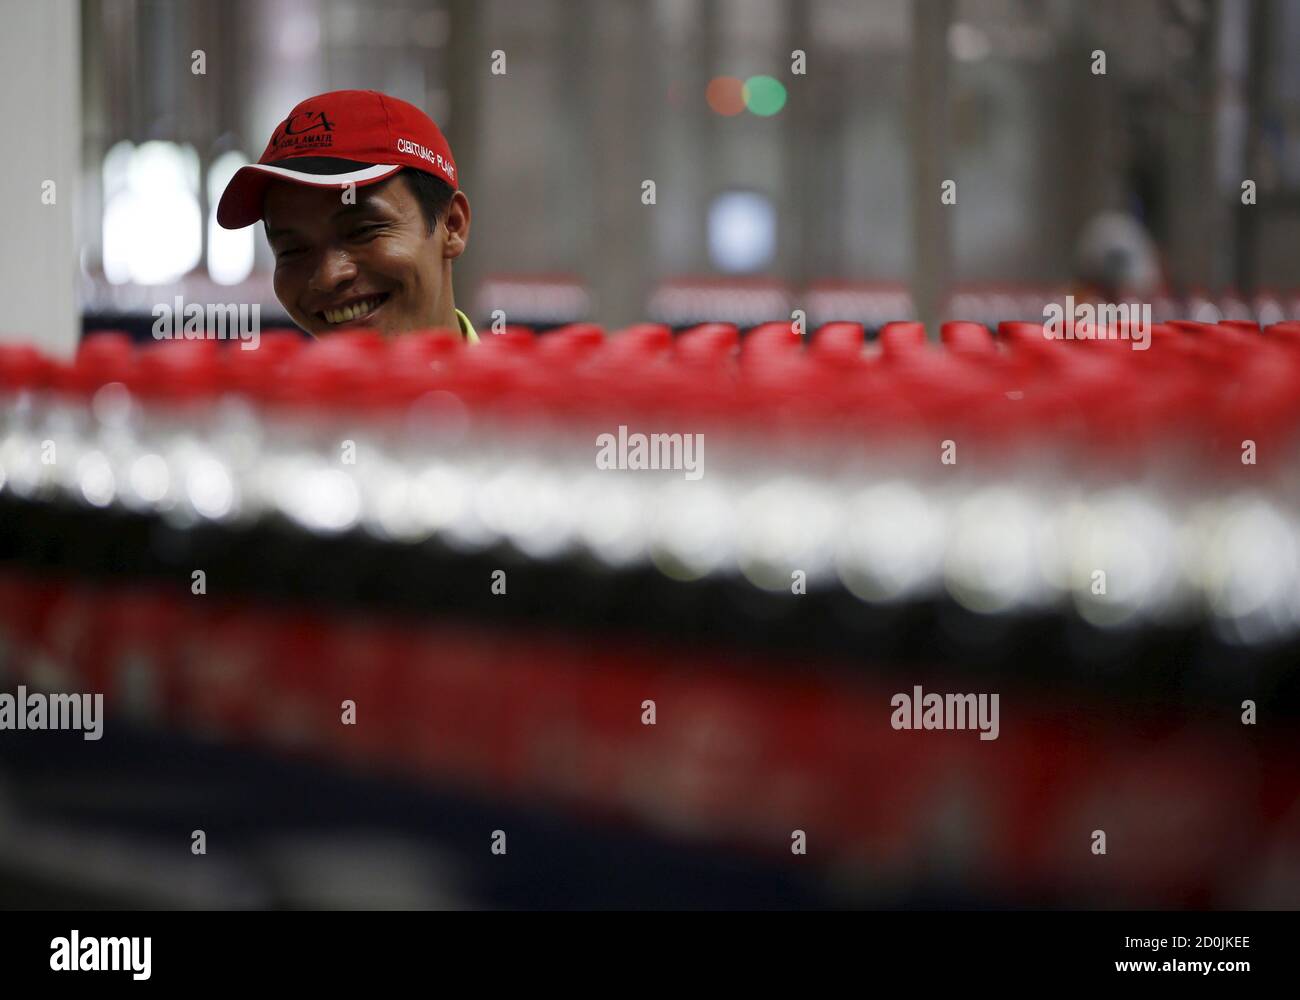 A worker watches bottles of Coca-Cola pass by on a newly inaugurated production line at the Cikedokan Plant in Bekasi, West Java near Jakarta March 31, 2015. The Coca-Cola company inaugurated two new production lines as part of an investment package worth some $500 million to accelerate growth in the Indonesian market.  REUTERS/Darren Whiteside Stock Photo